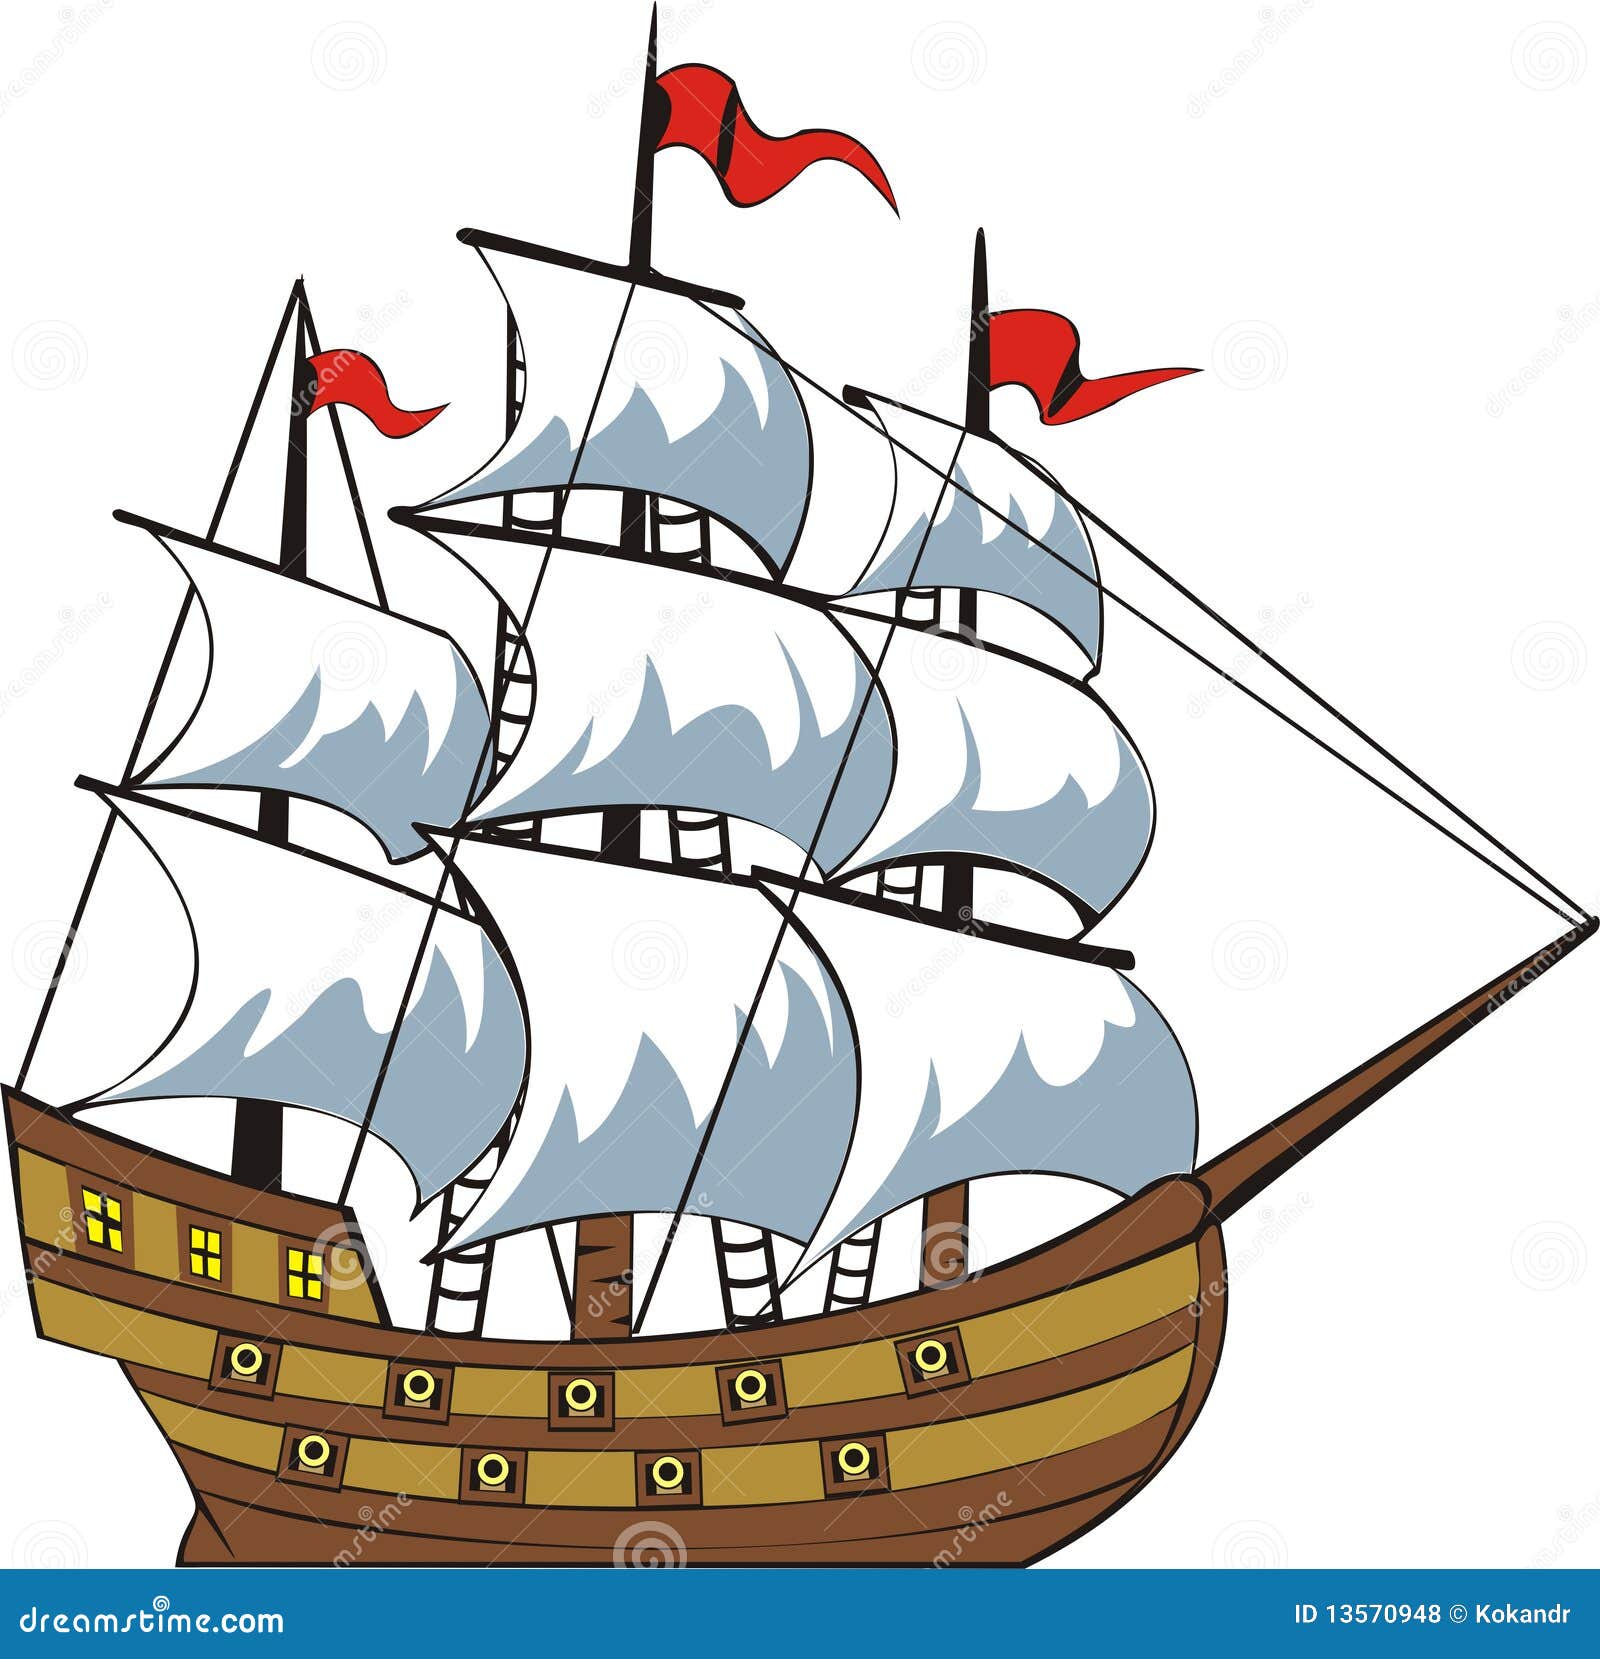 clipart picture of a ship - photo #15